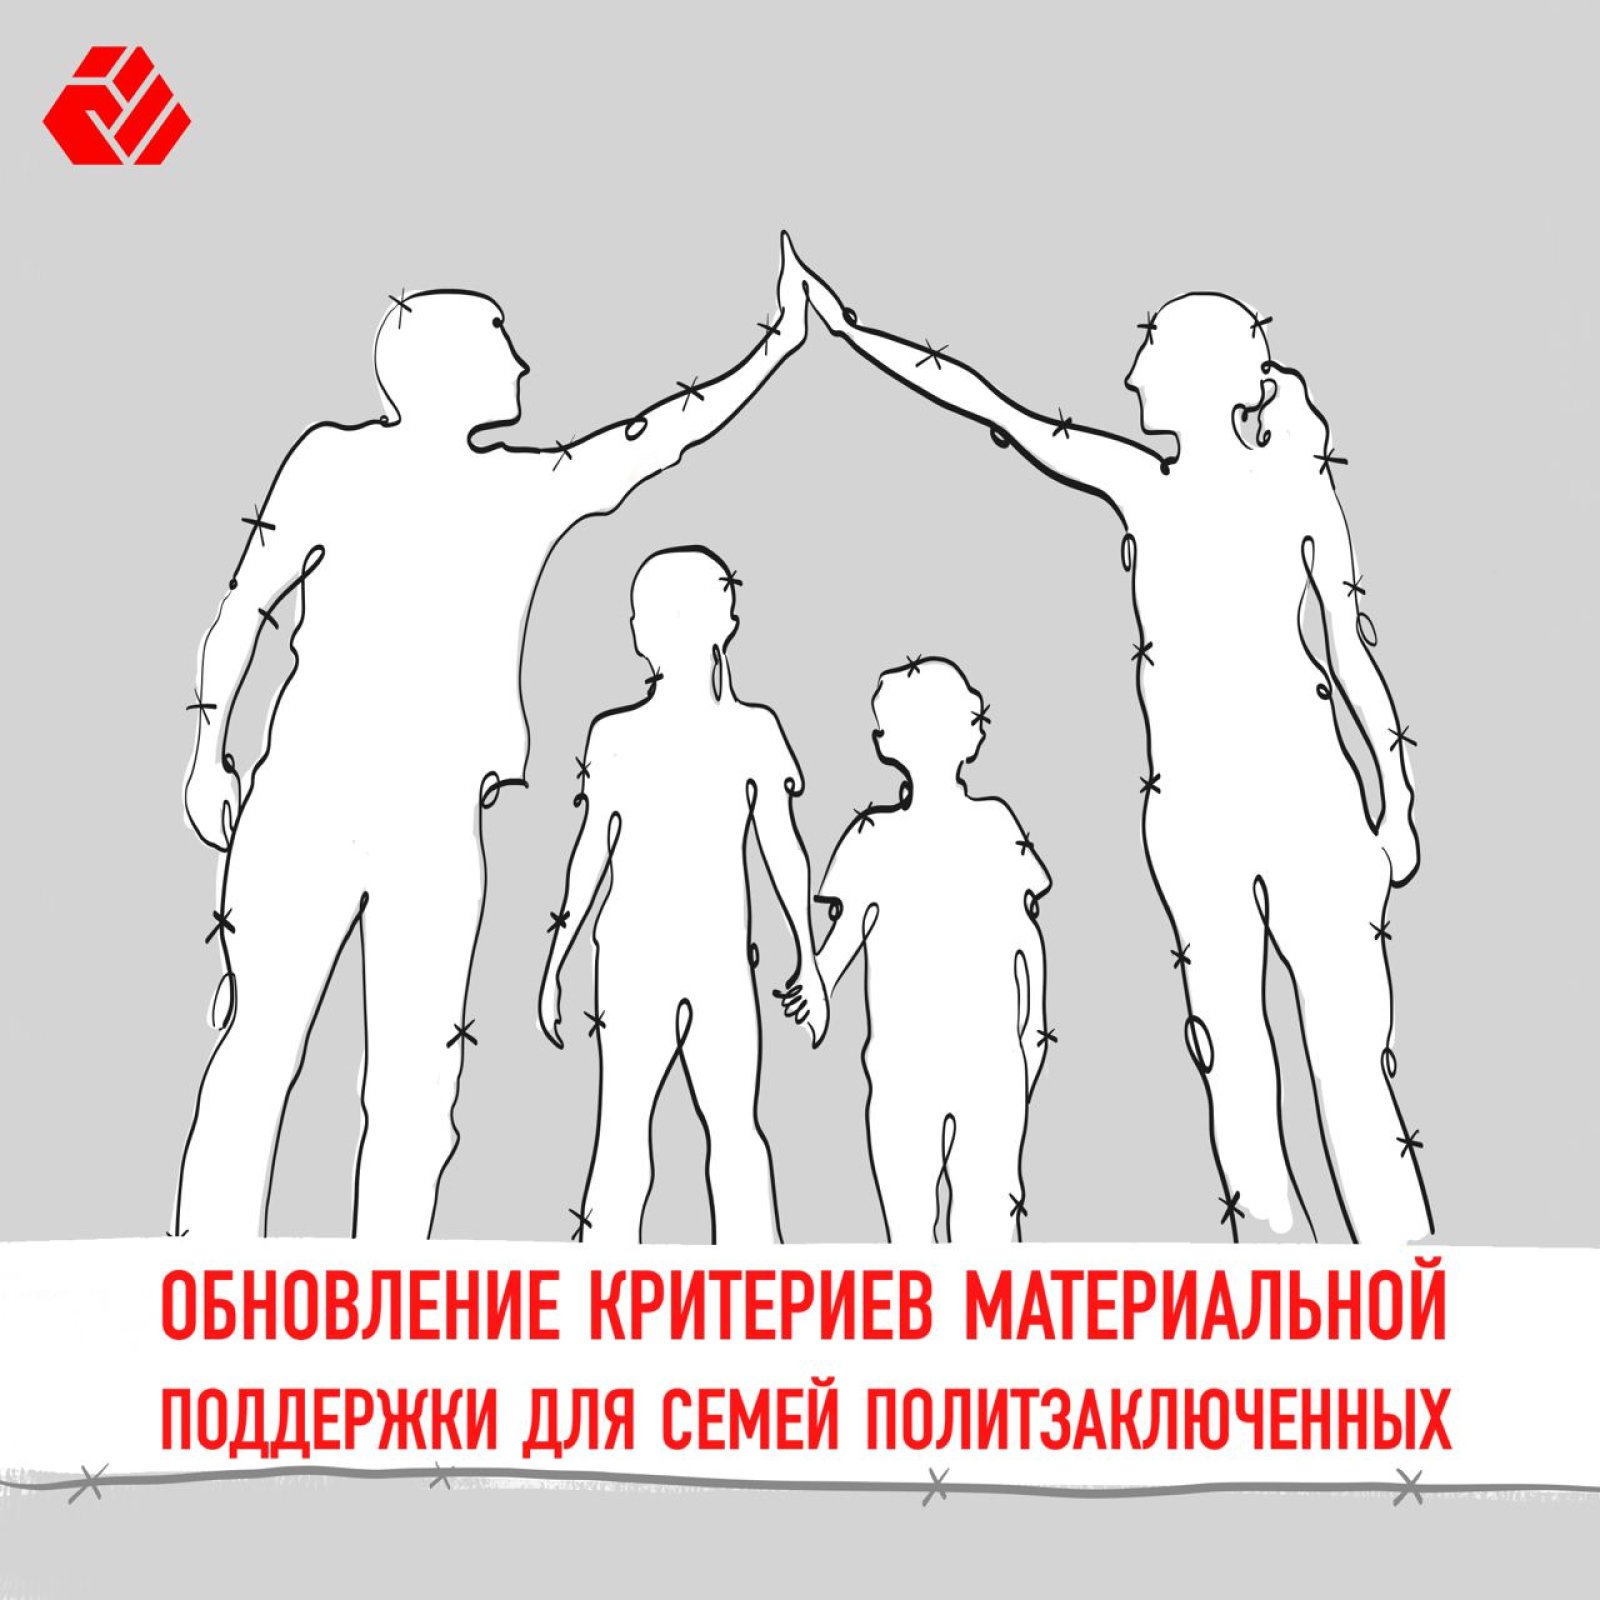 Update of material support criteria for families of political prisoners